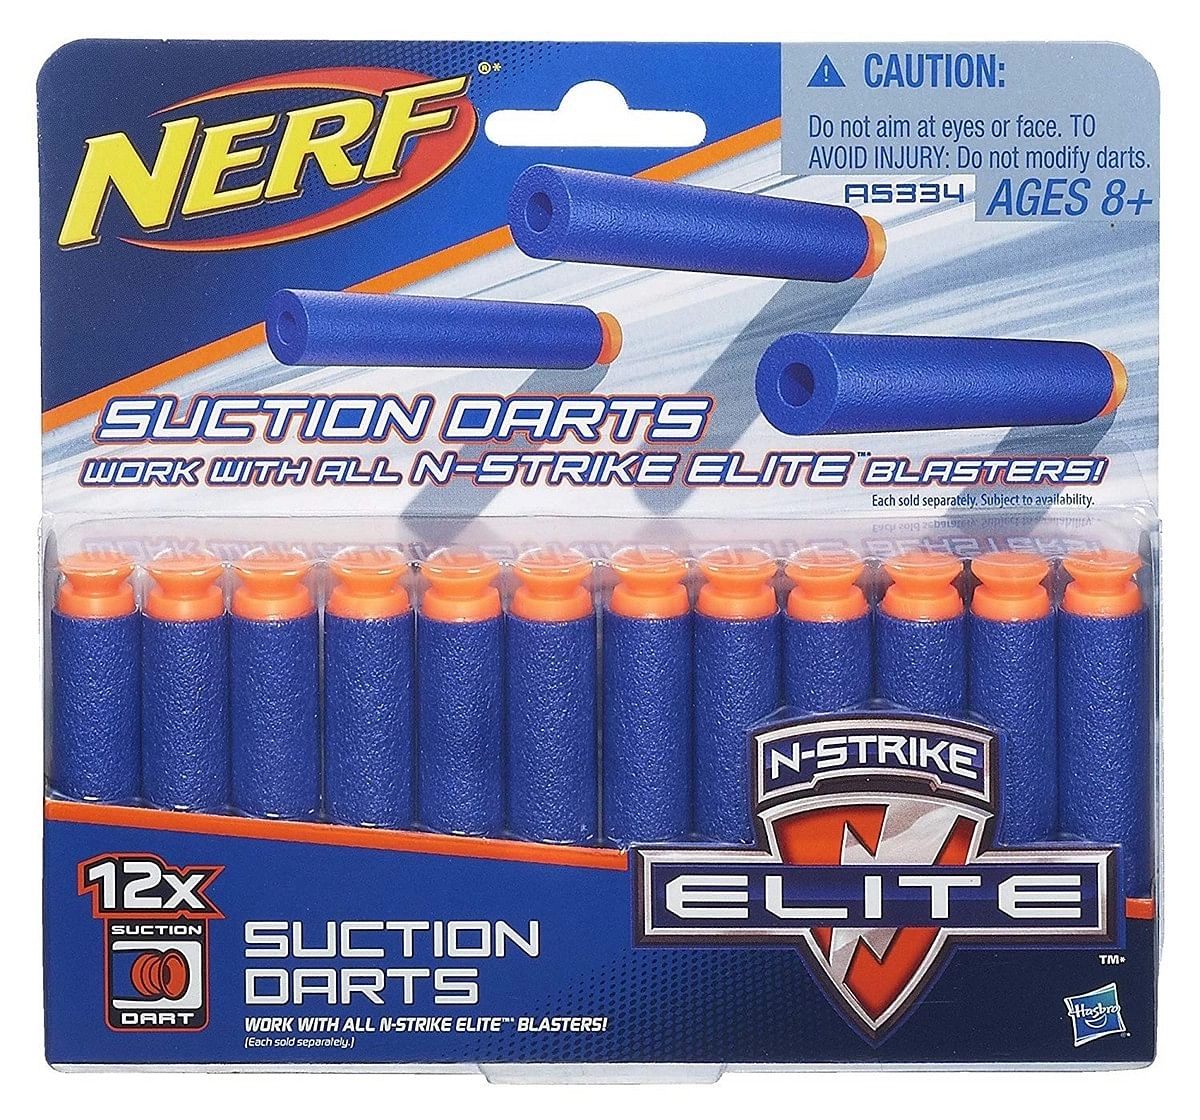  Nerf Suction Darts 12-Pack Refill For Nerf Elite Blasters - 8Y+ 